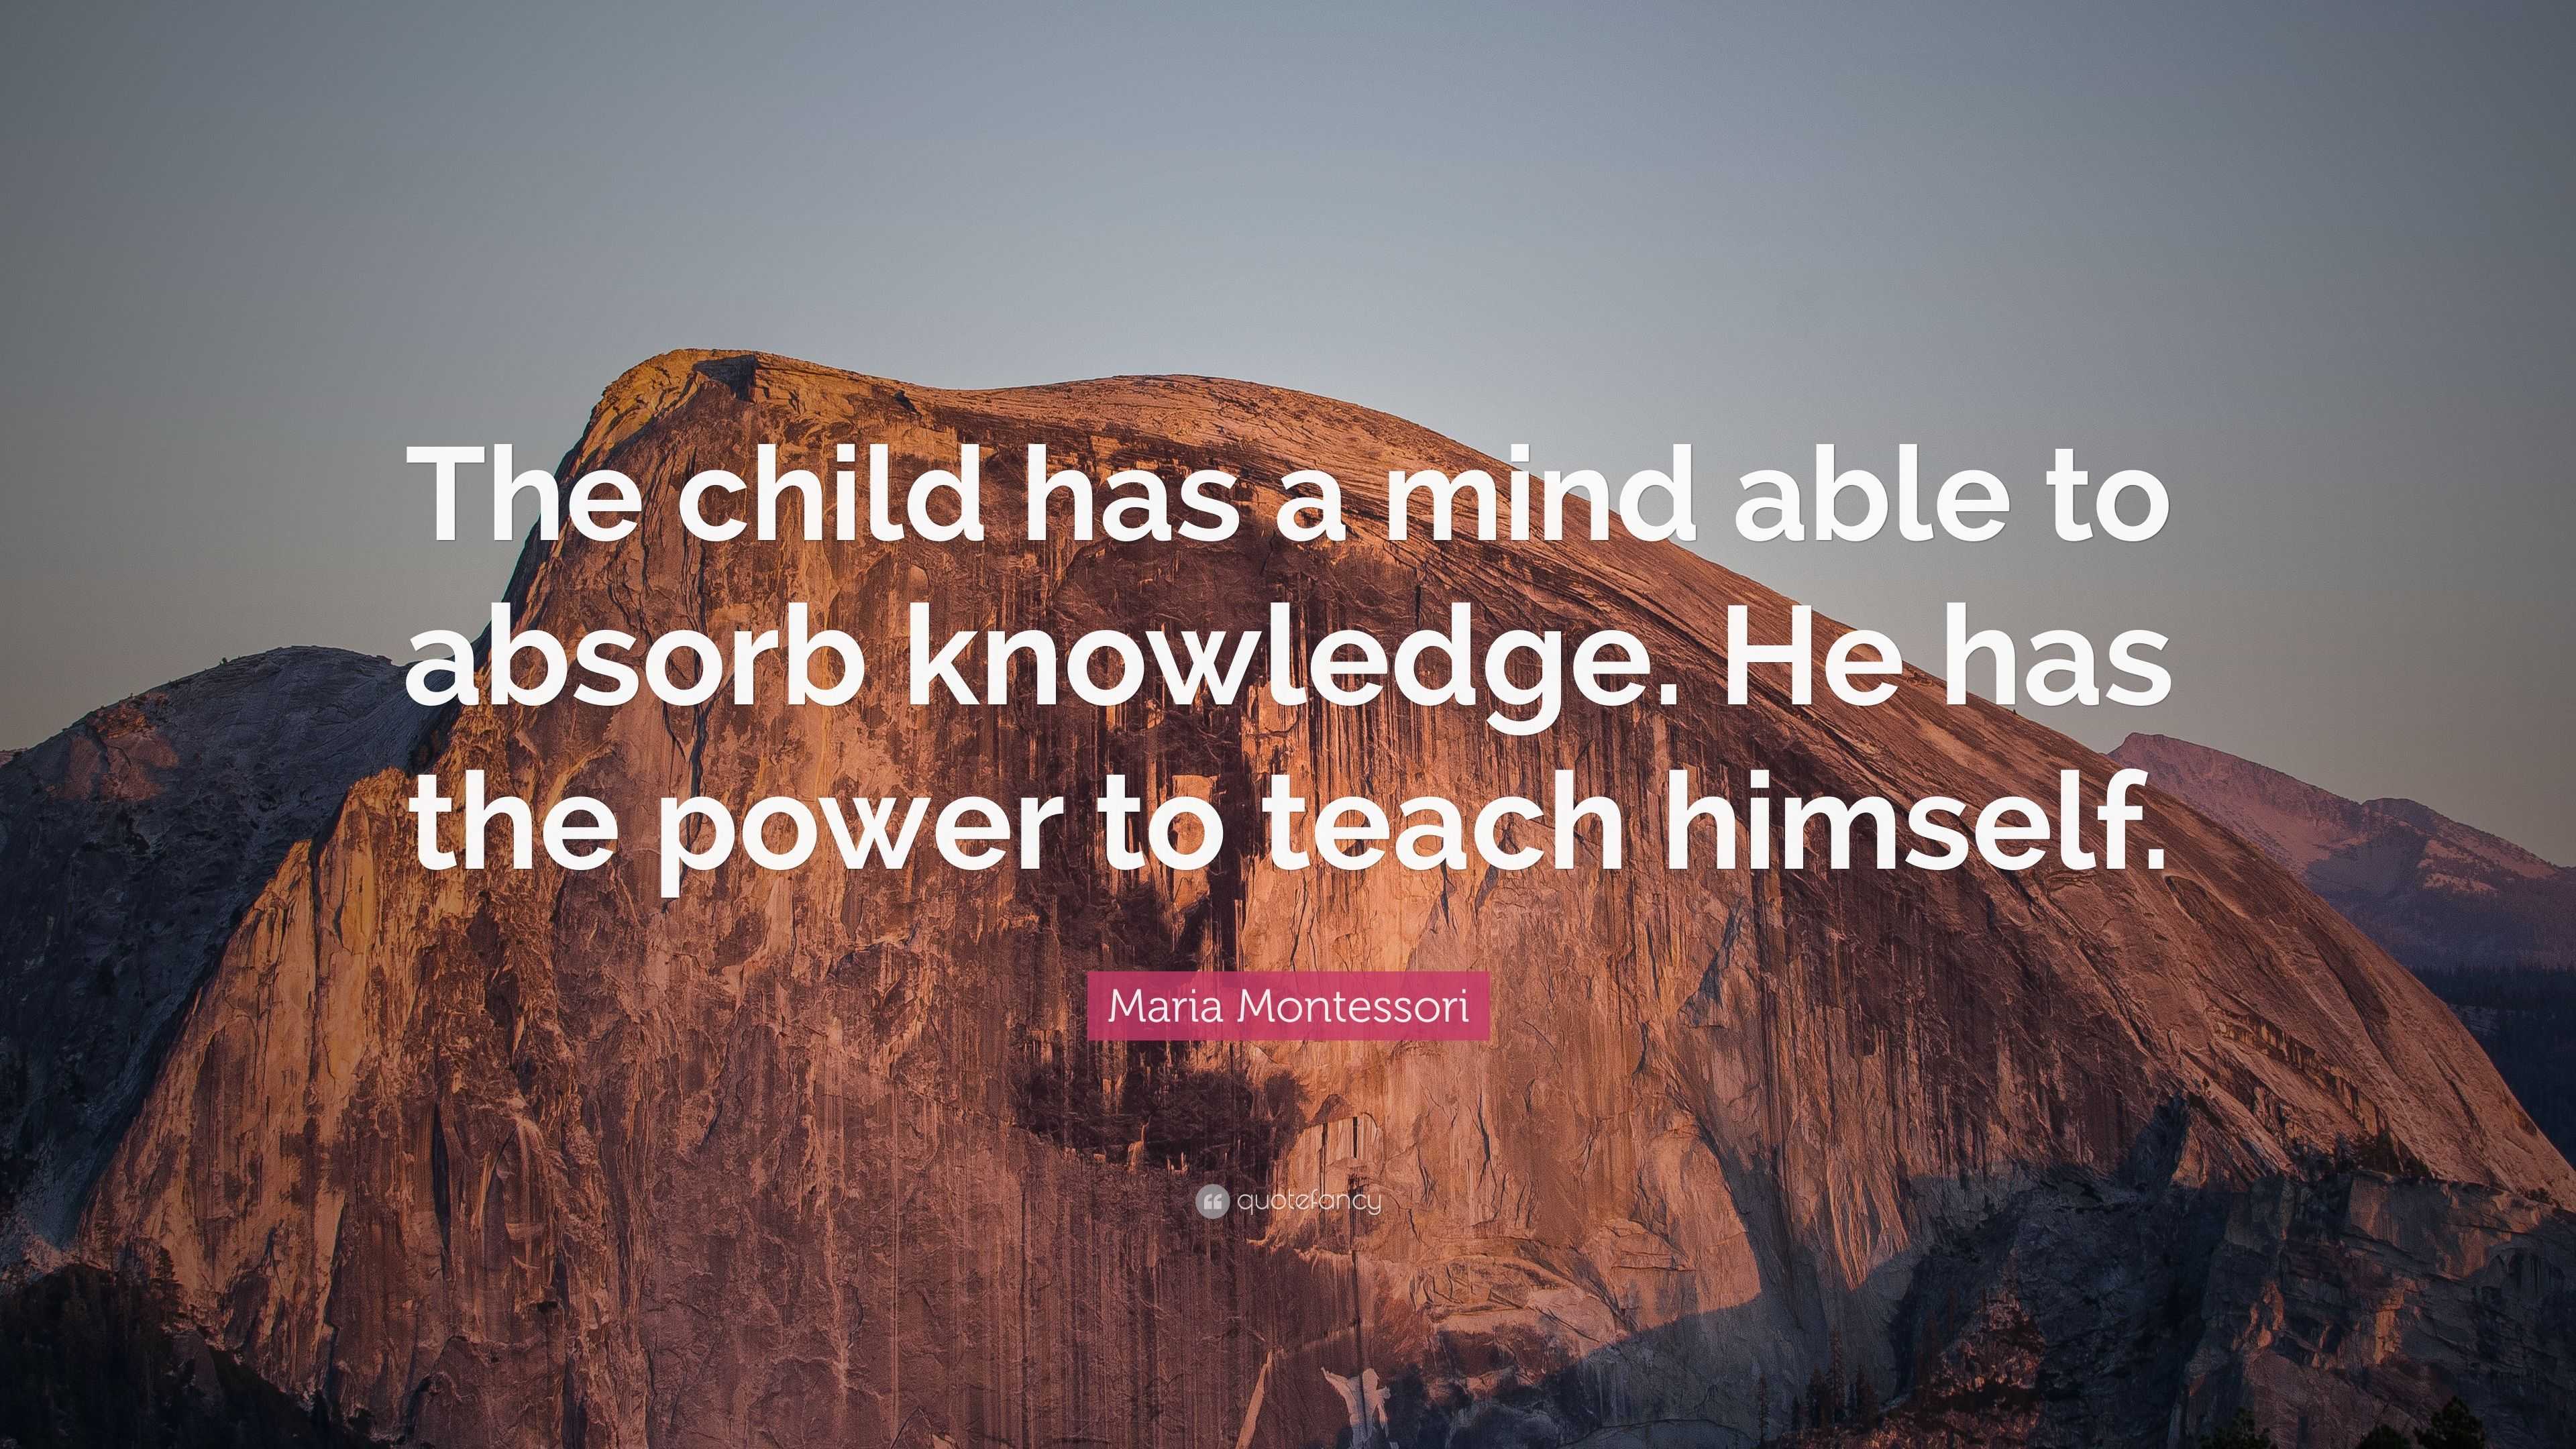 Maria Montessori Quote: “The child has a mind able to absorb knowledge